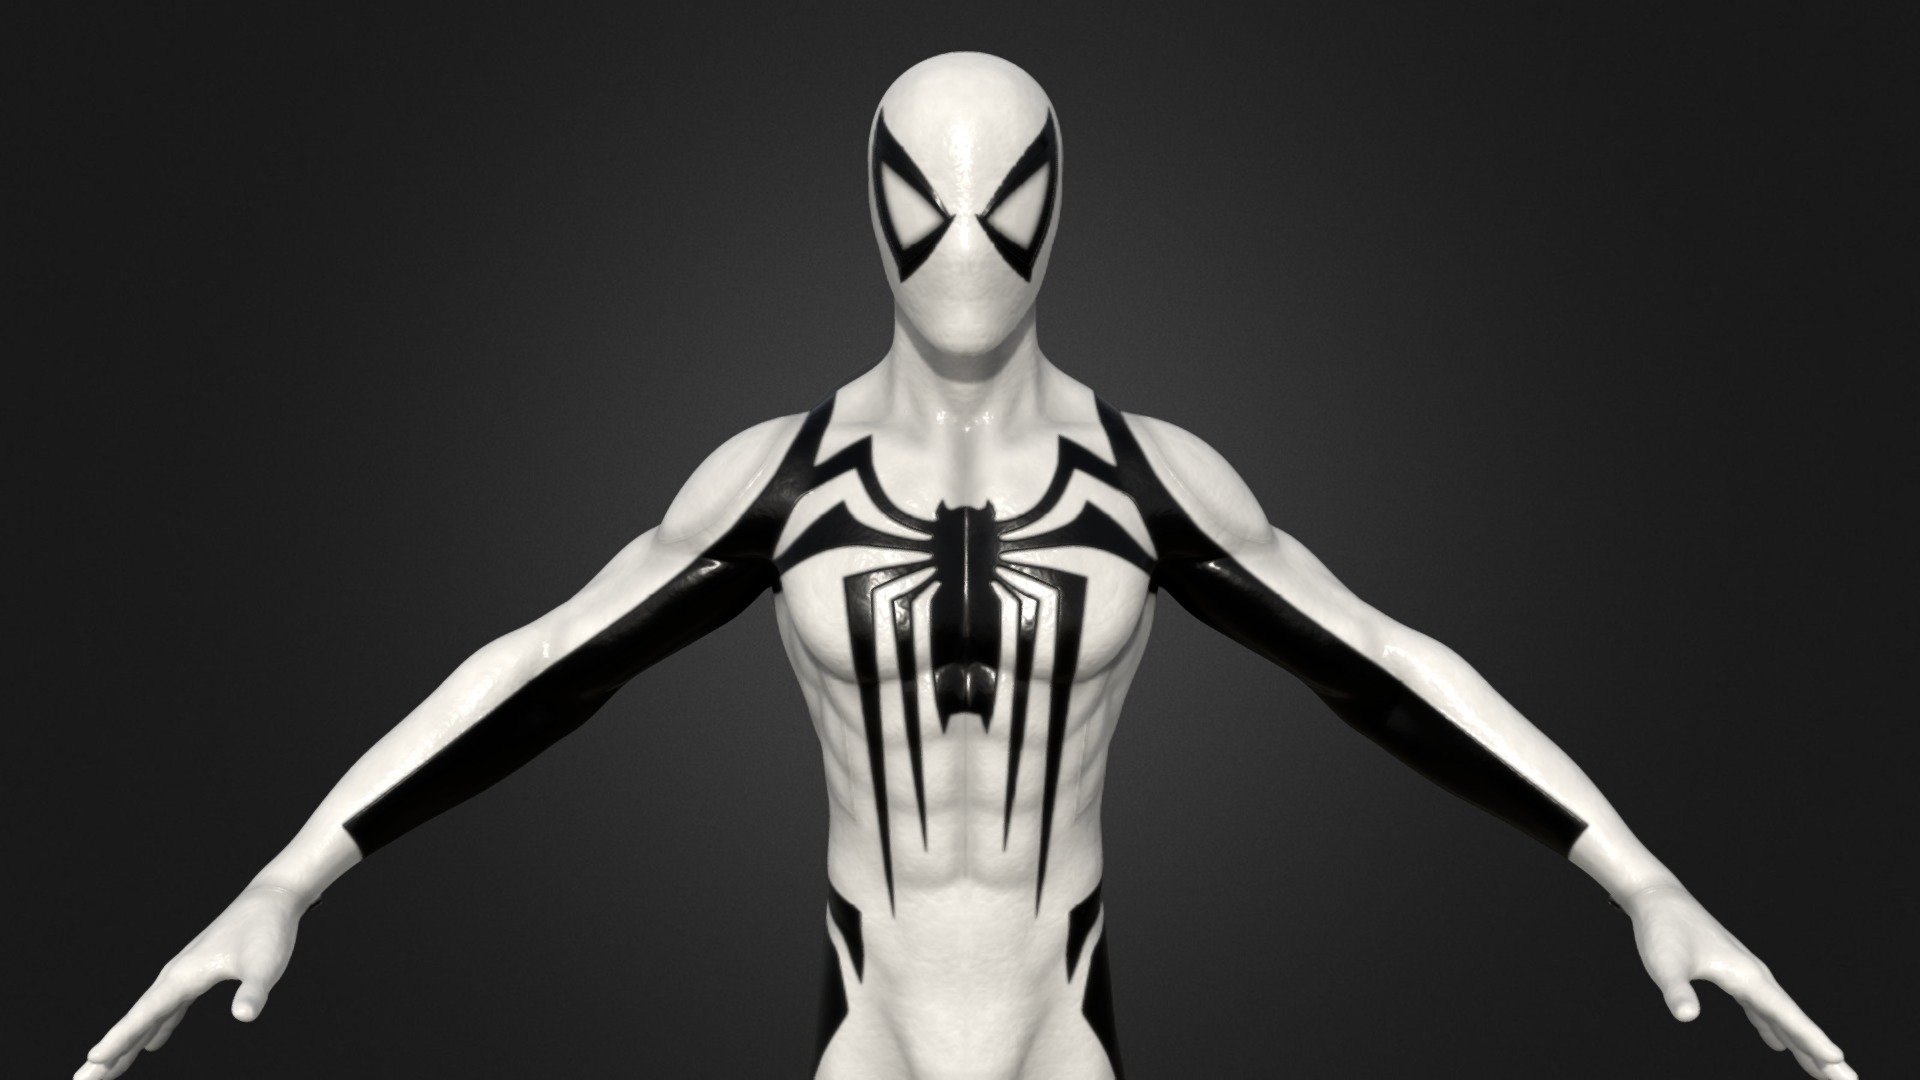 Spiderman comic books character published by Marvel Comics. 




Model was made on Maya, Zbrush, substance painter  and Blender . 

This model is inspired by Anti-venom suit from Marvel Spiderman 2 video game 

The model has a Spiderman Anti-venom suit 

High quality texture work.

The model comes with complete 4k textures and Blender, FBX And OBJ file formats 

The model has 2 materials contains 5 maps Basecolor, Roughness, Metalness, Normal and Ao

All textures and materials are included and mapped. (4k resoulutions)

No special plugin needed to open scene

The model can be rigg easily
 - Spider-Man Anti Venom Suit - Buy Royalty Free 3D model by AFSHAN ALI (@Aliflex) 3d model